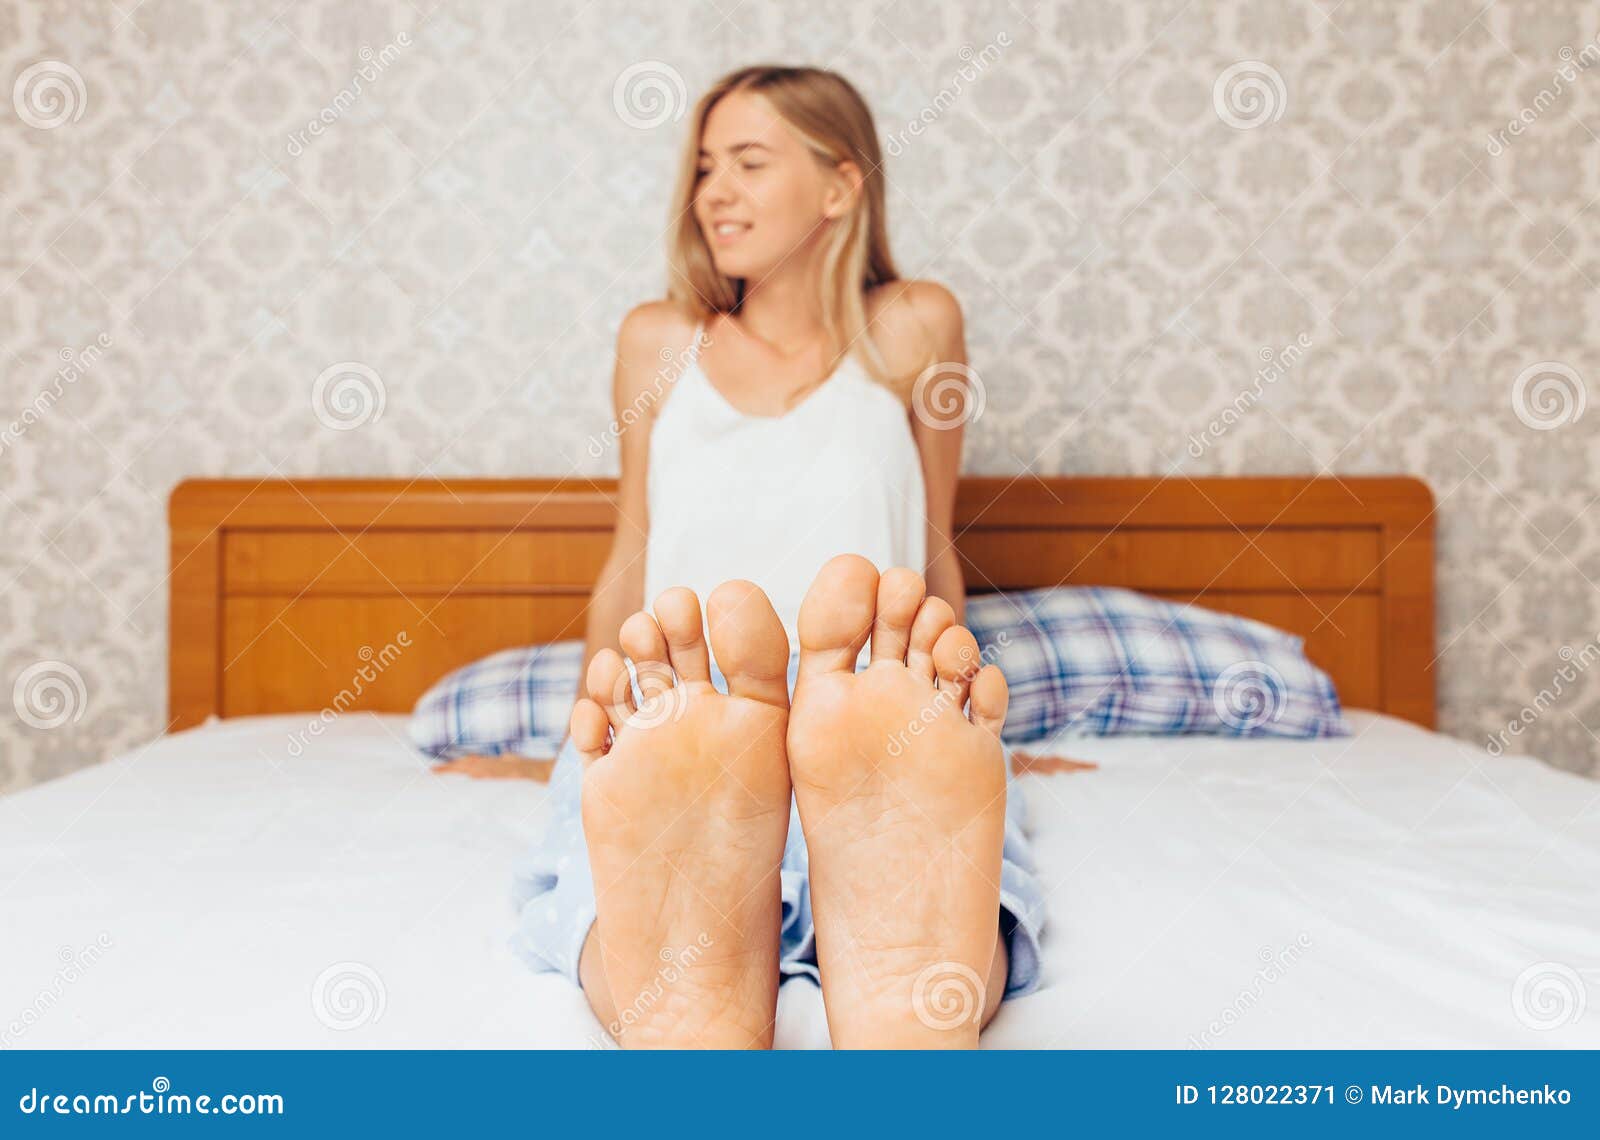 girls feet in bed photo